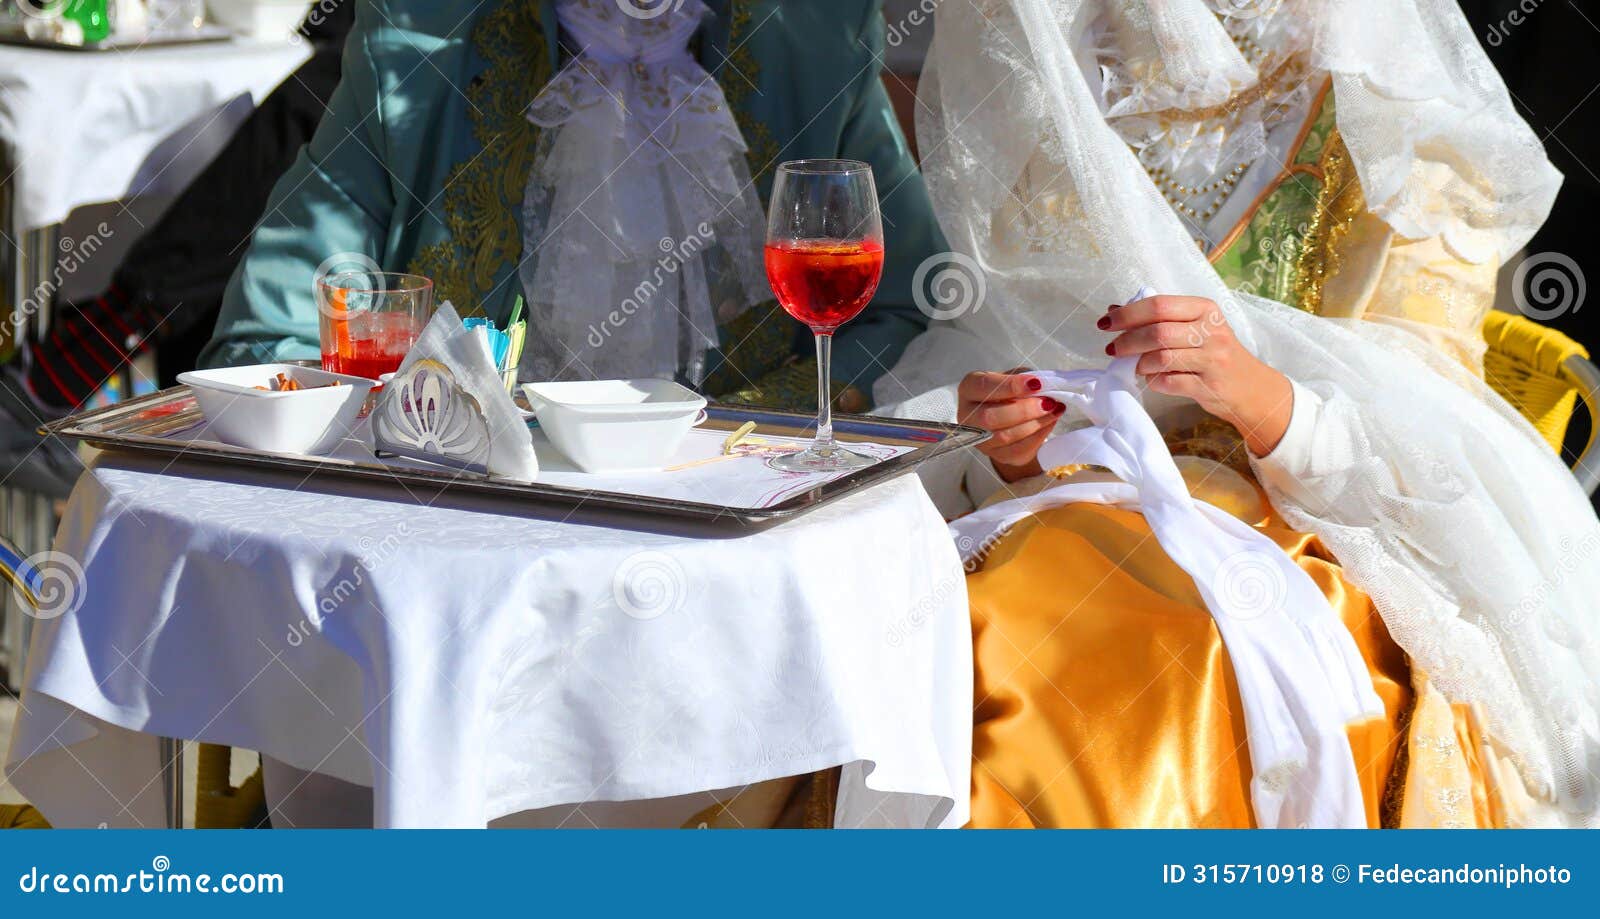 noble couple from venice wearing old clothes from the last century while drinking an alcoholic spritz at the alfresco table